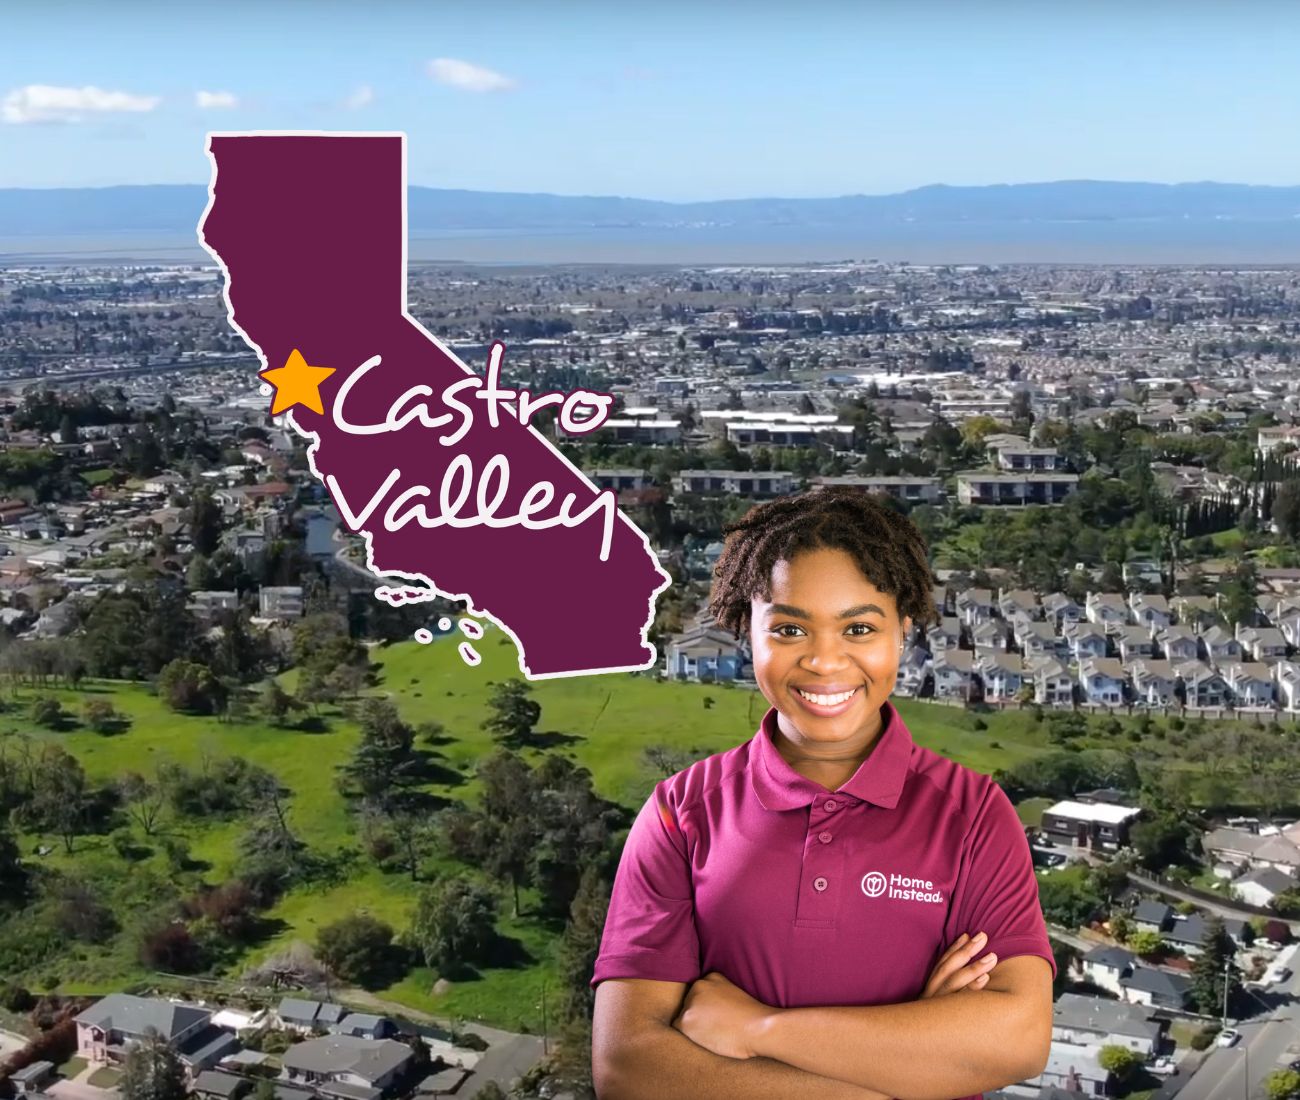 Home Instead caregiver with Castro Valley, California in the background